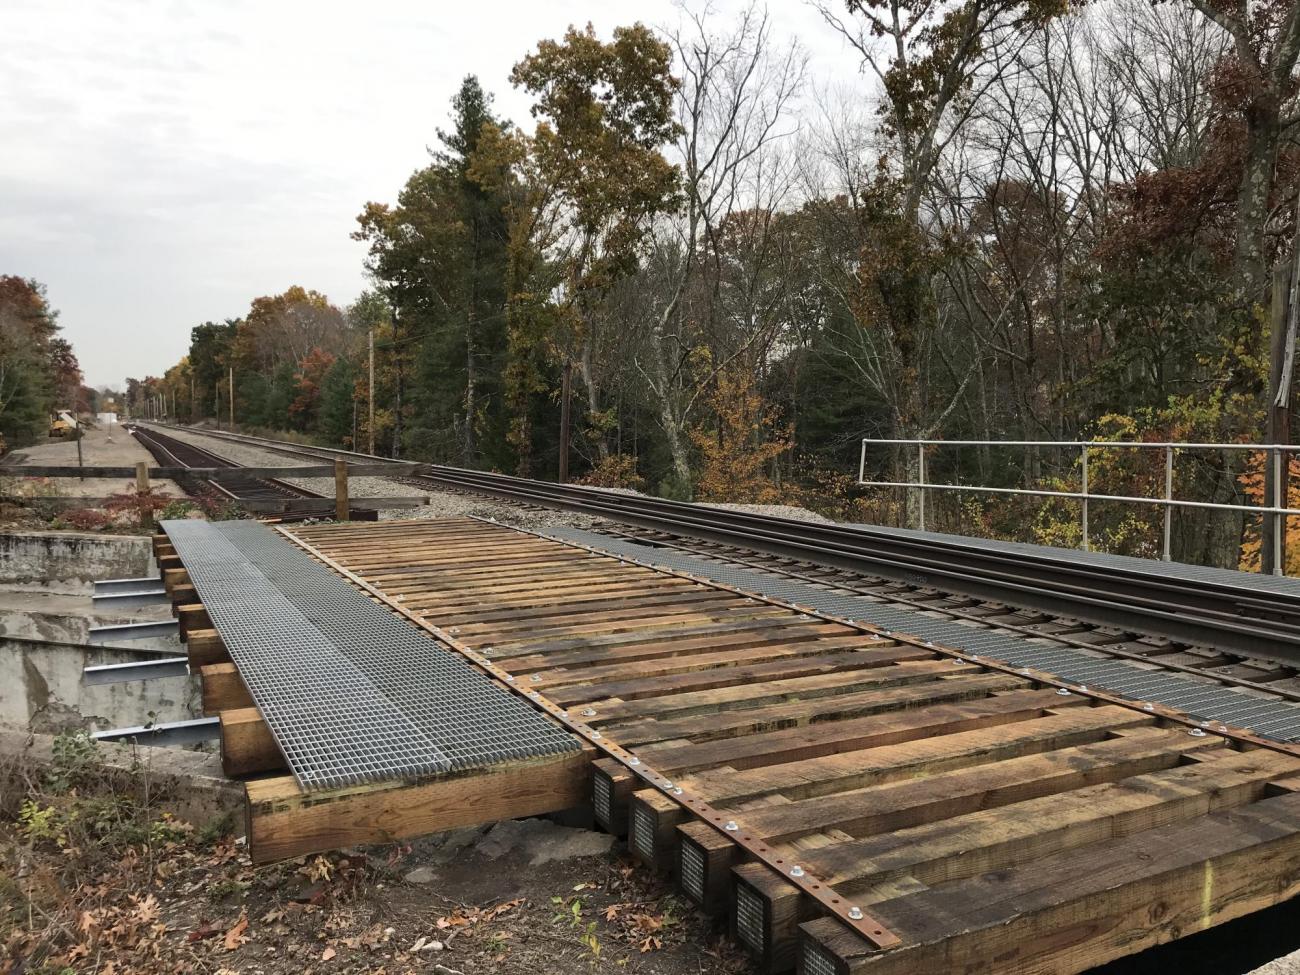 A new steel support structure and timber bridge ties were installed at the West Street bridge in October 2019